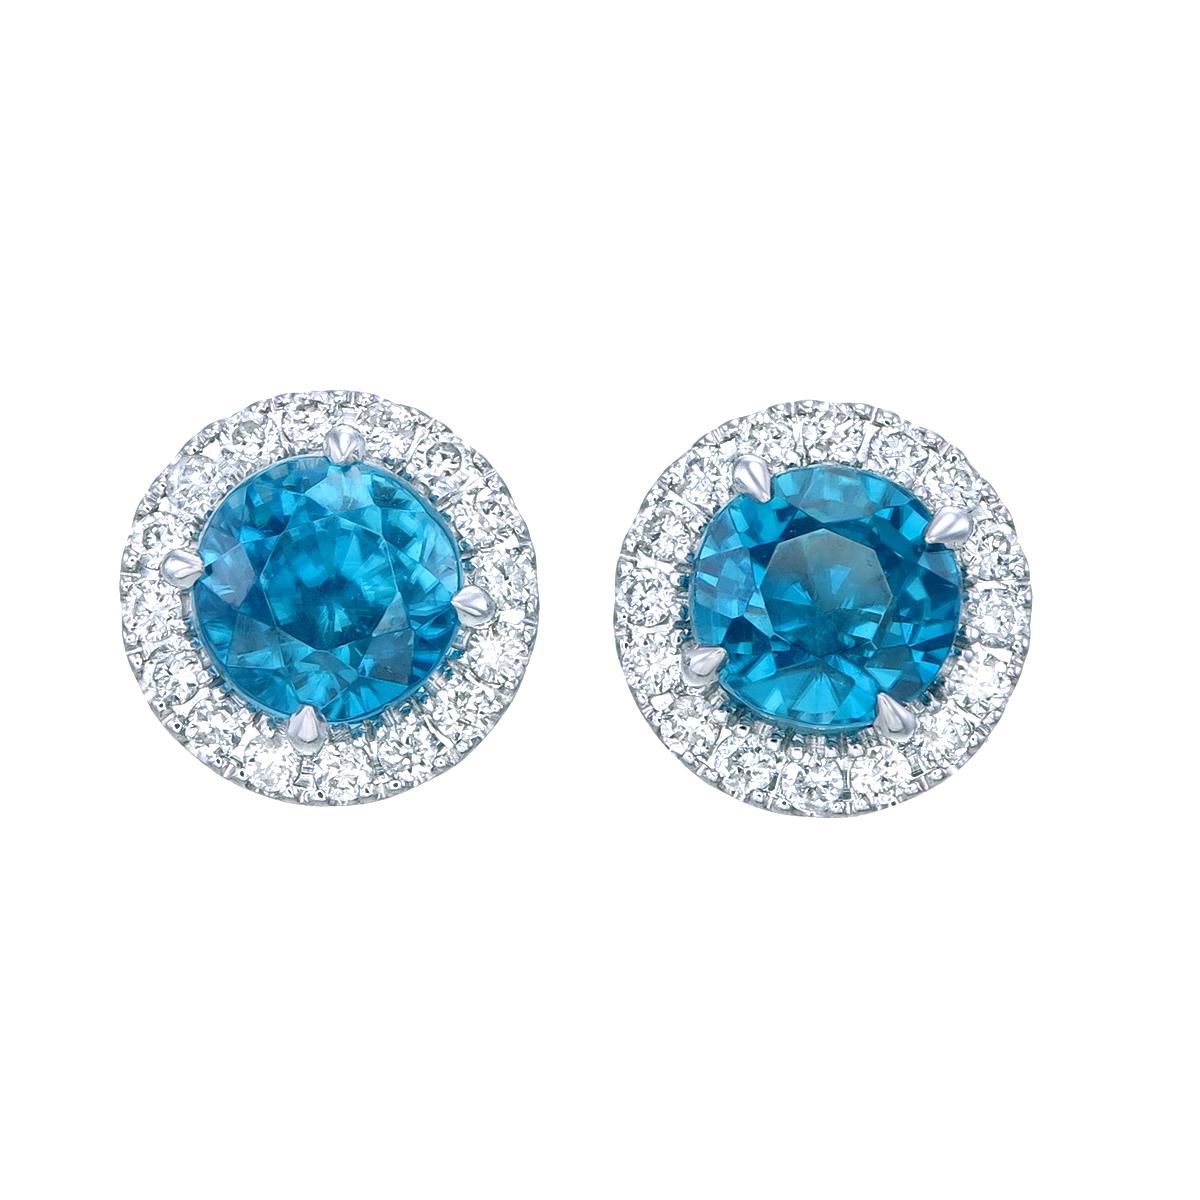 Orloff of Denmark's; Nautical Duet Earrings.
Ratanakiri Zircon Diamond Earrings.

These exquisite earrings feature radiant zircon stones reminiscent of the deep and mesmerizing hues of the ocean. Surrounded by a halo of sparkling diamonds, the ocean